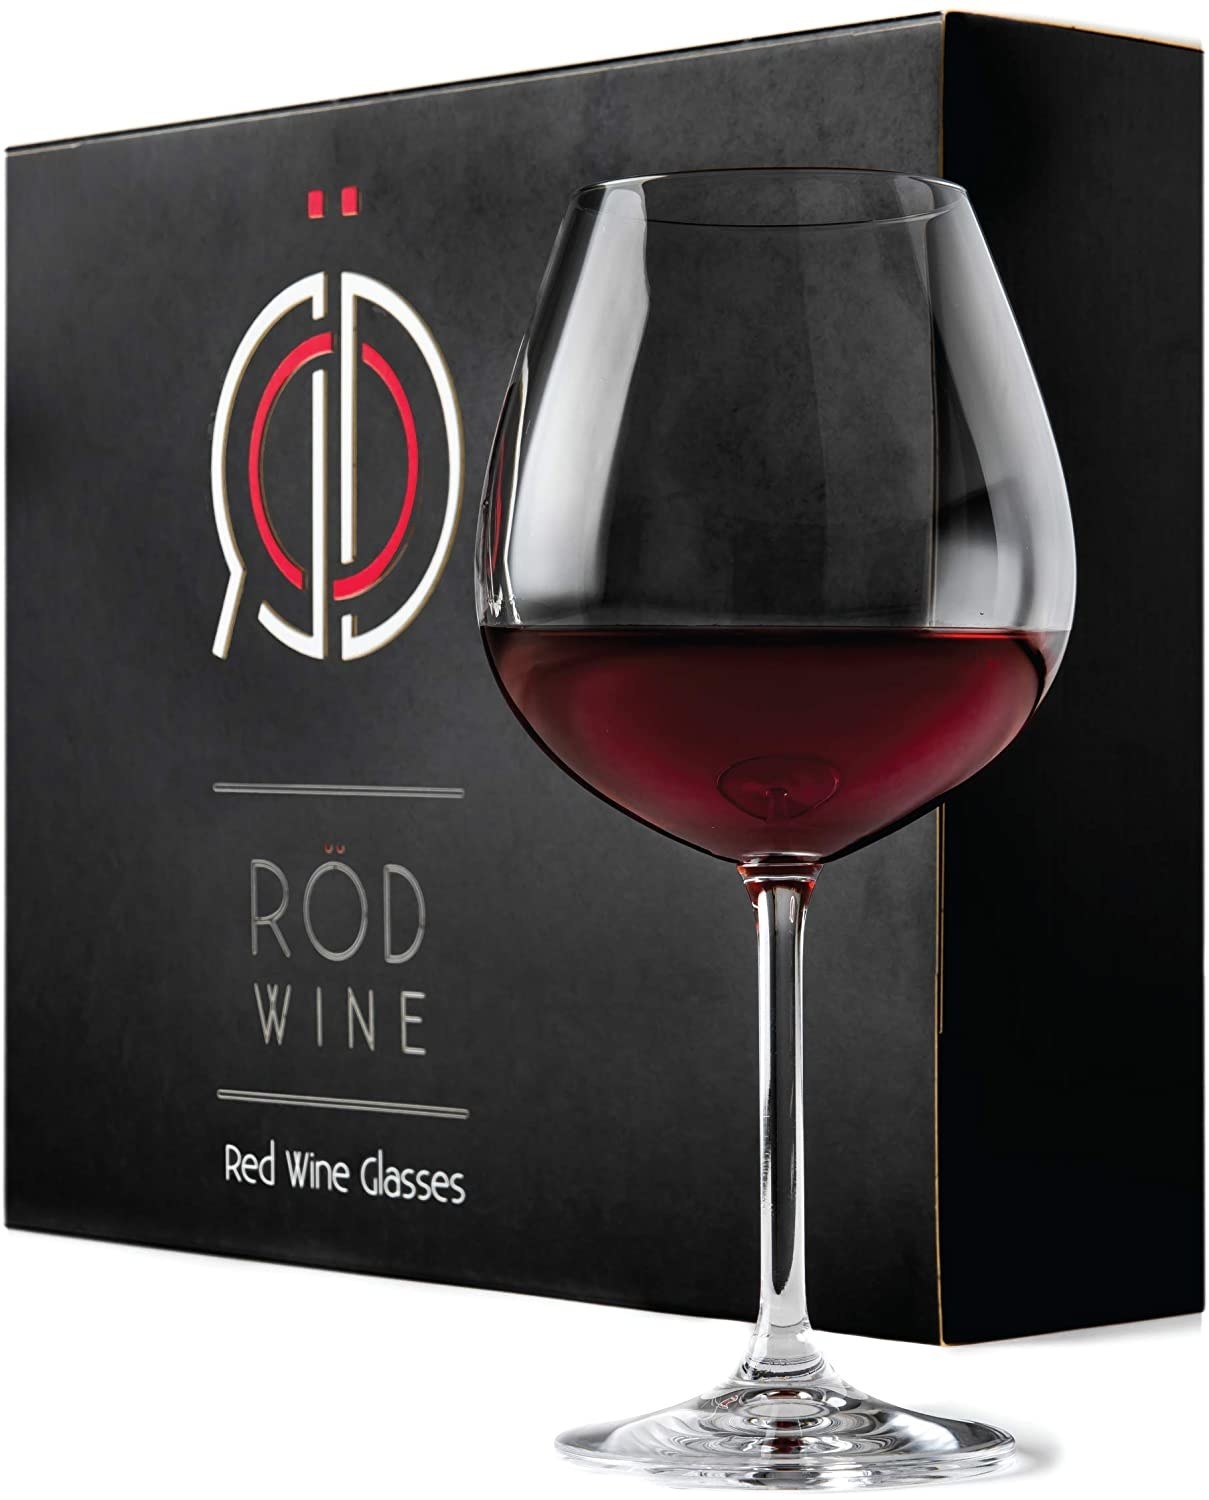 A RÖD wine glass filled with red wine set in front of the box it comes in.